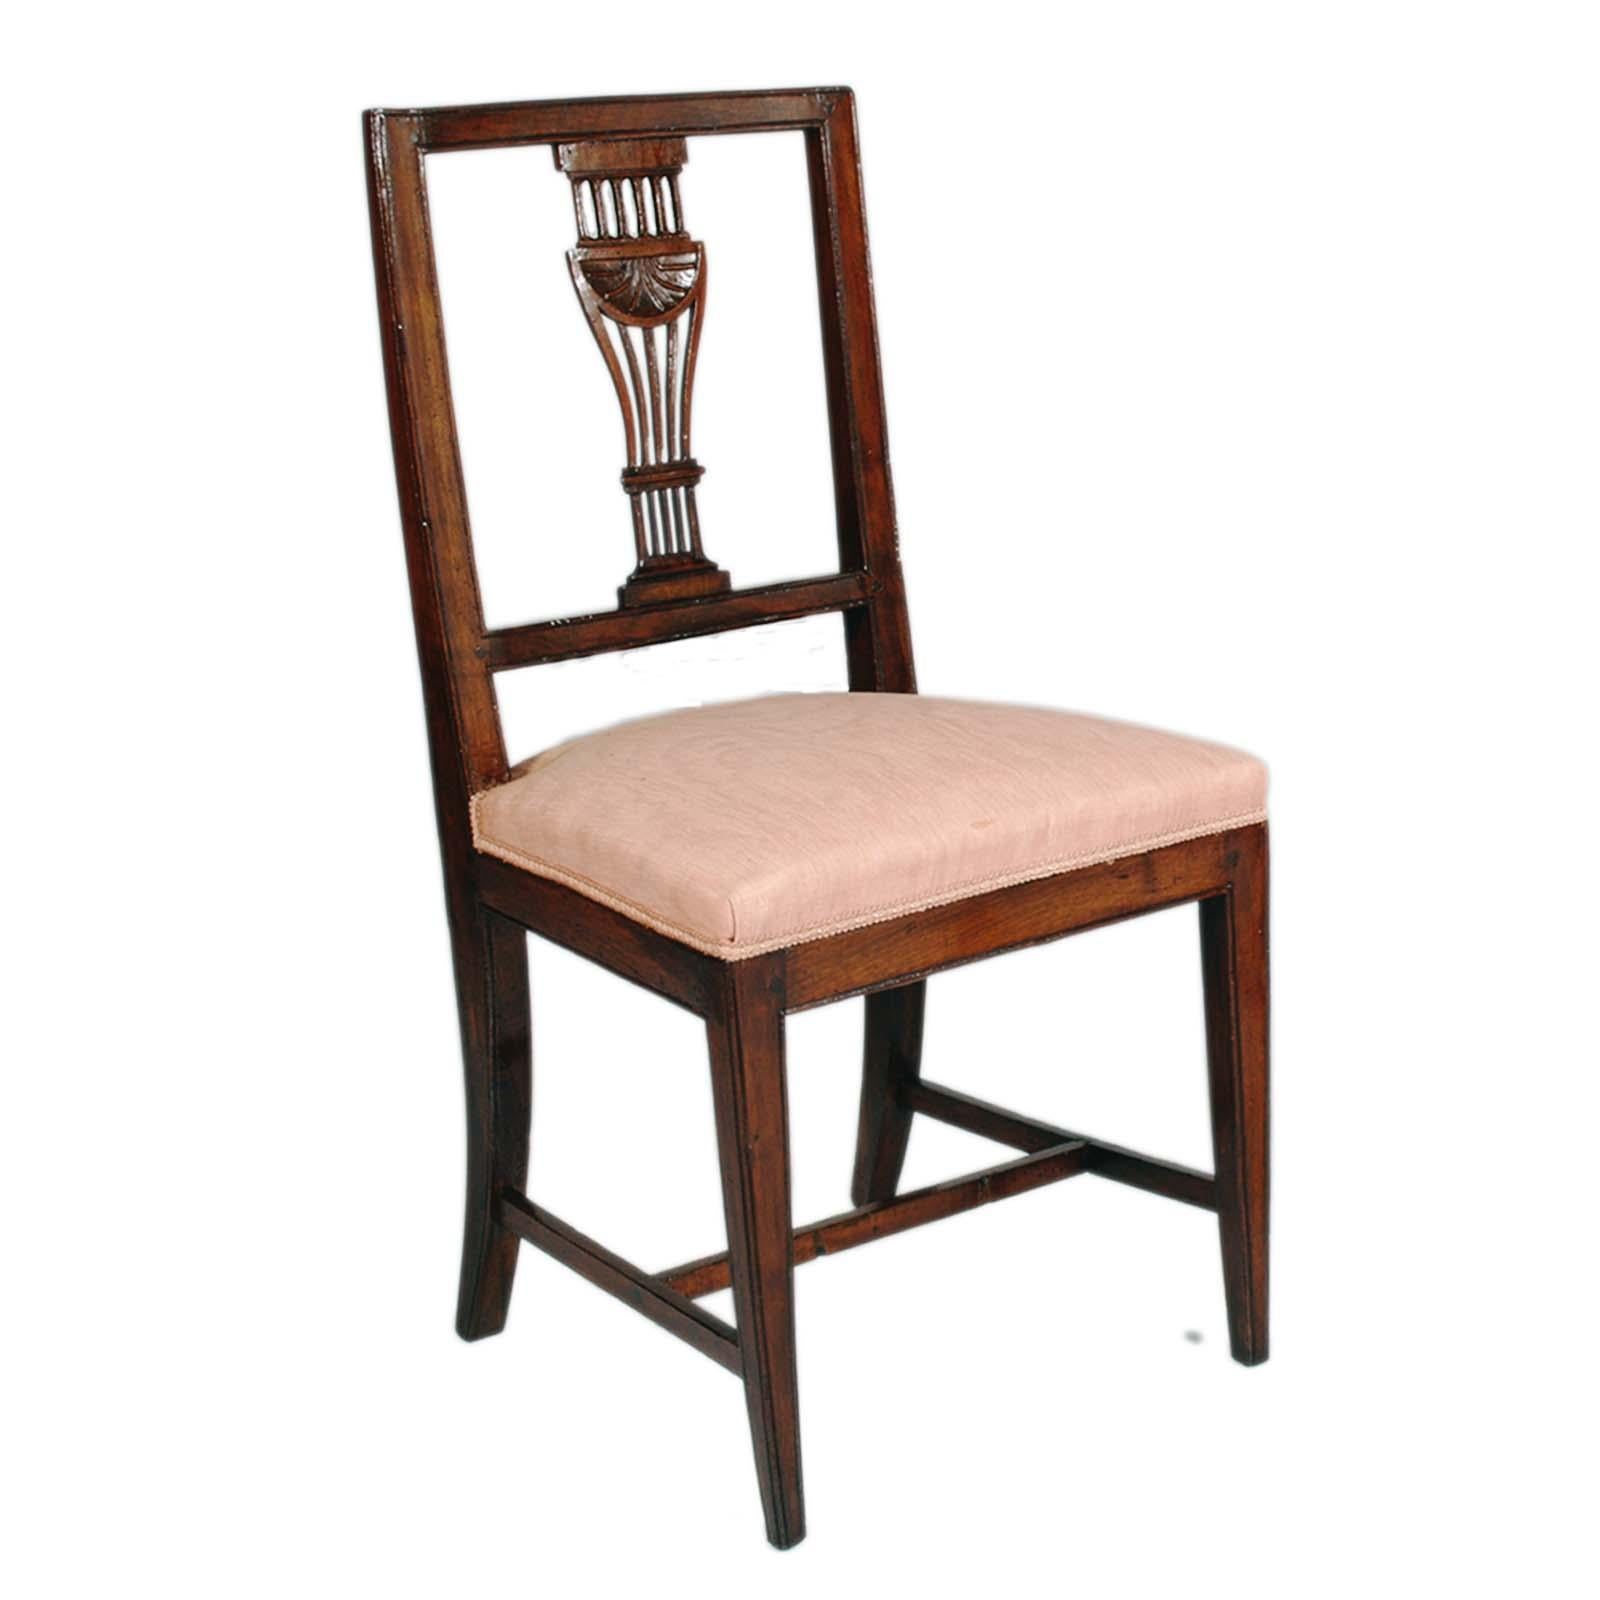 Venetian Six Asolane Biedermeier Chairs in Walnut, Lyre-Shaped Back, Hand-Carved In Good Condition For Sale In Vigonza, Padua